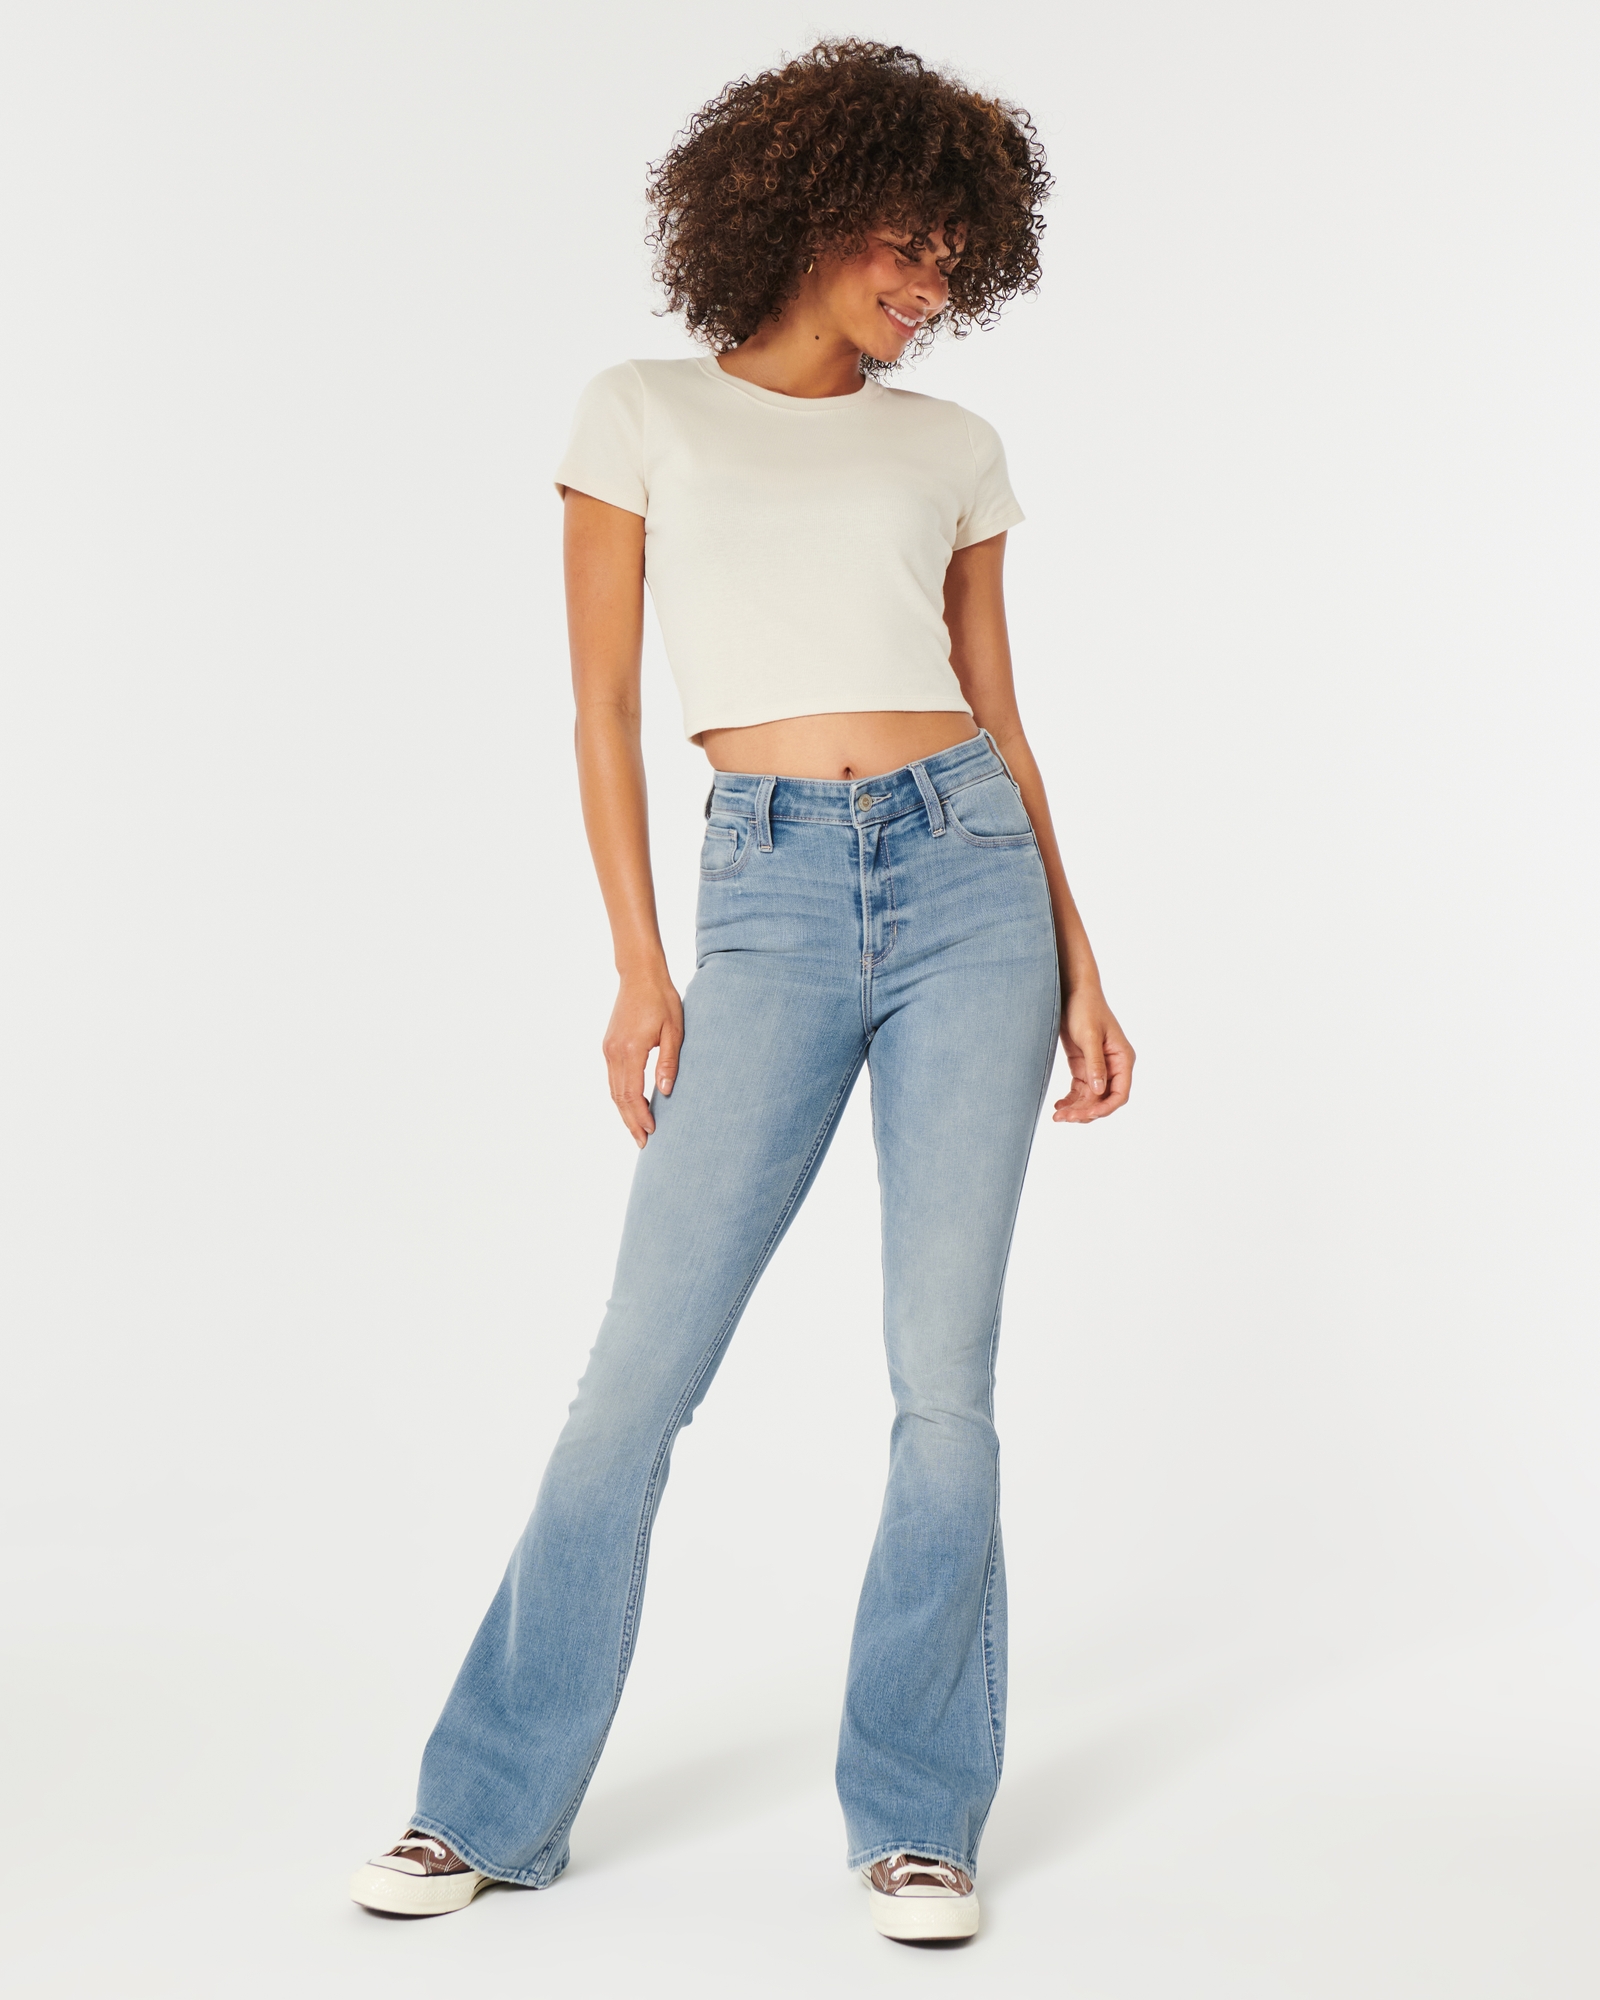 WOMENS JEANS Hollister flare jeans + American eagle skinny jeans